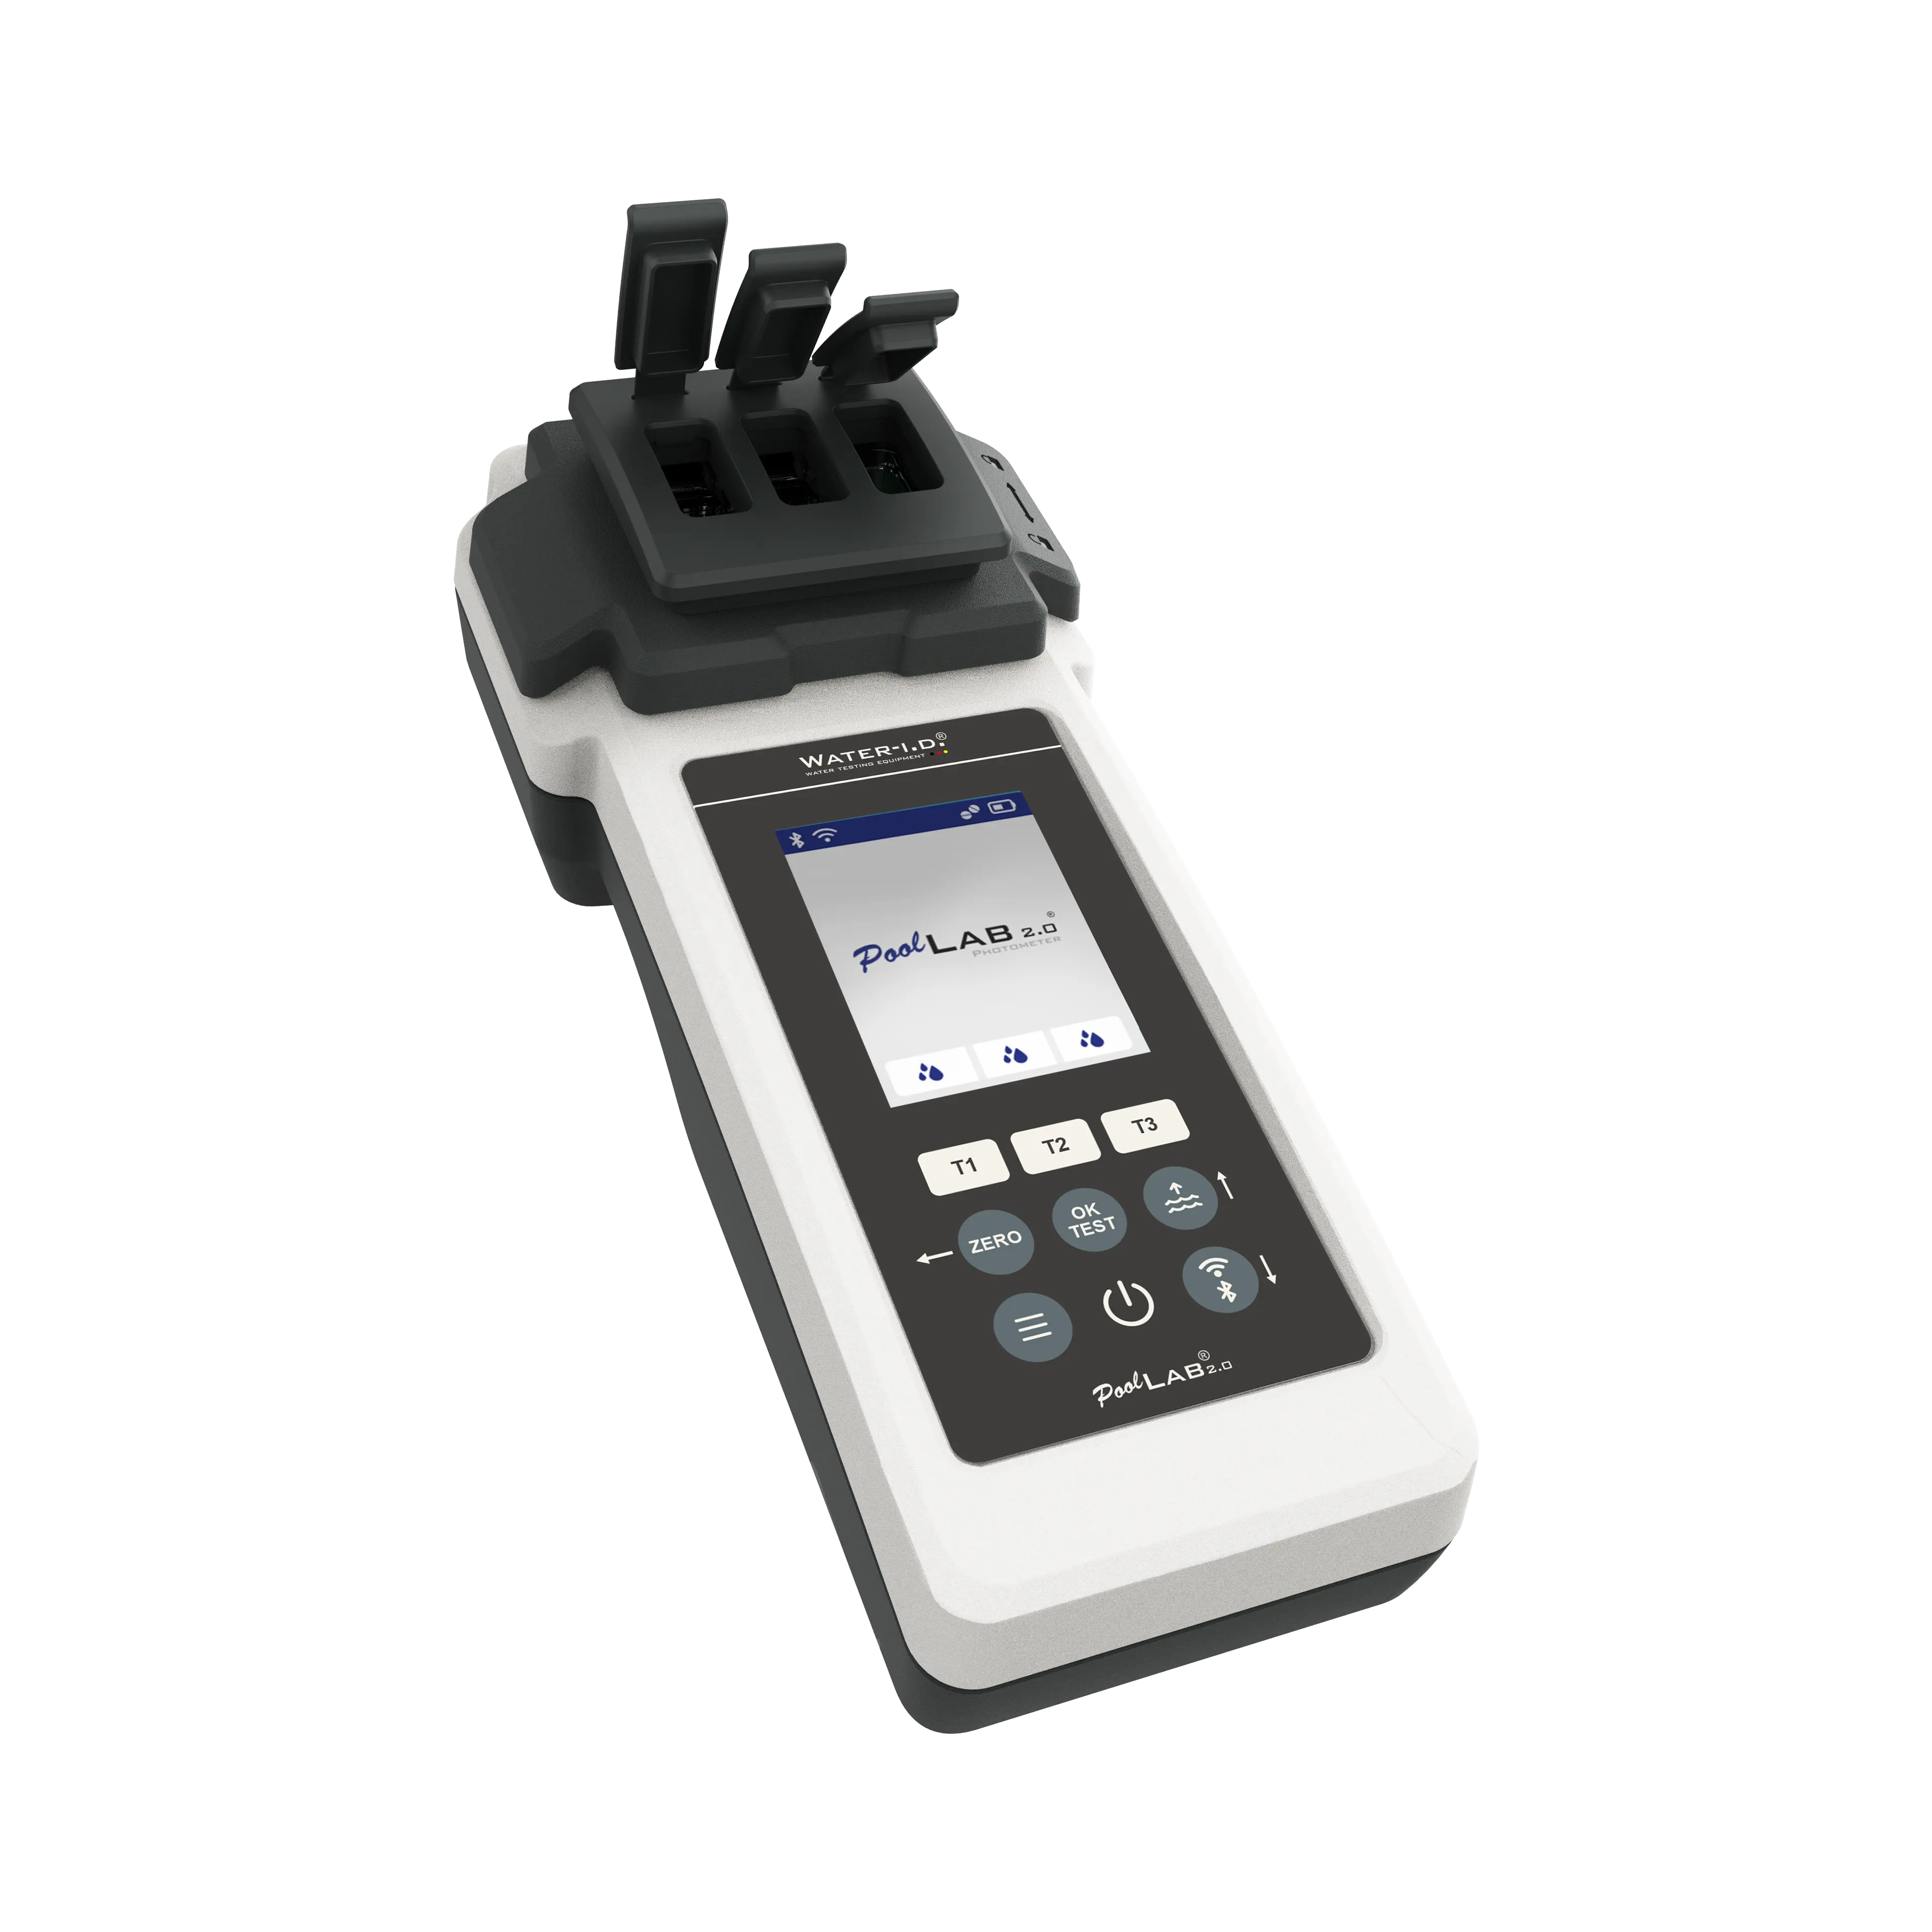 PoolLab® 2.0 Photometer with Bluetooth® and WiFi